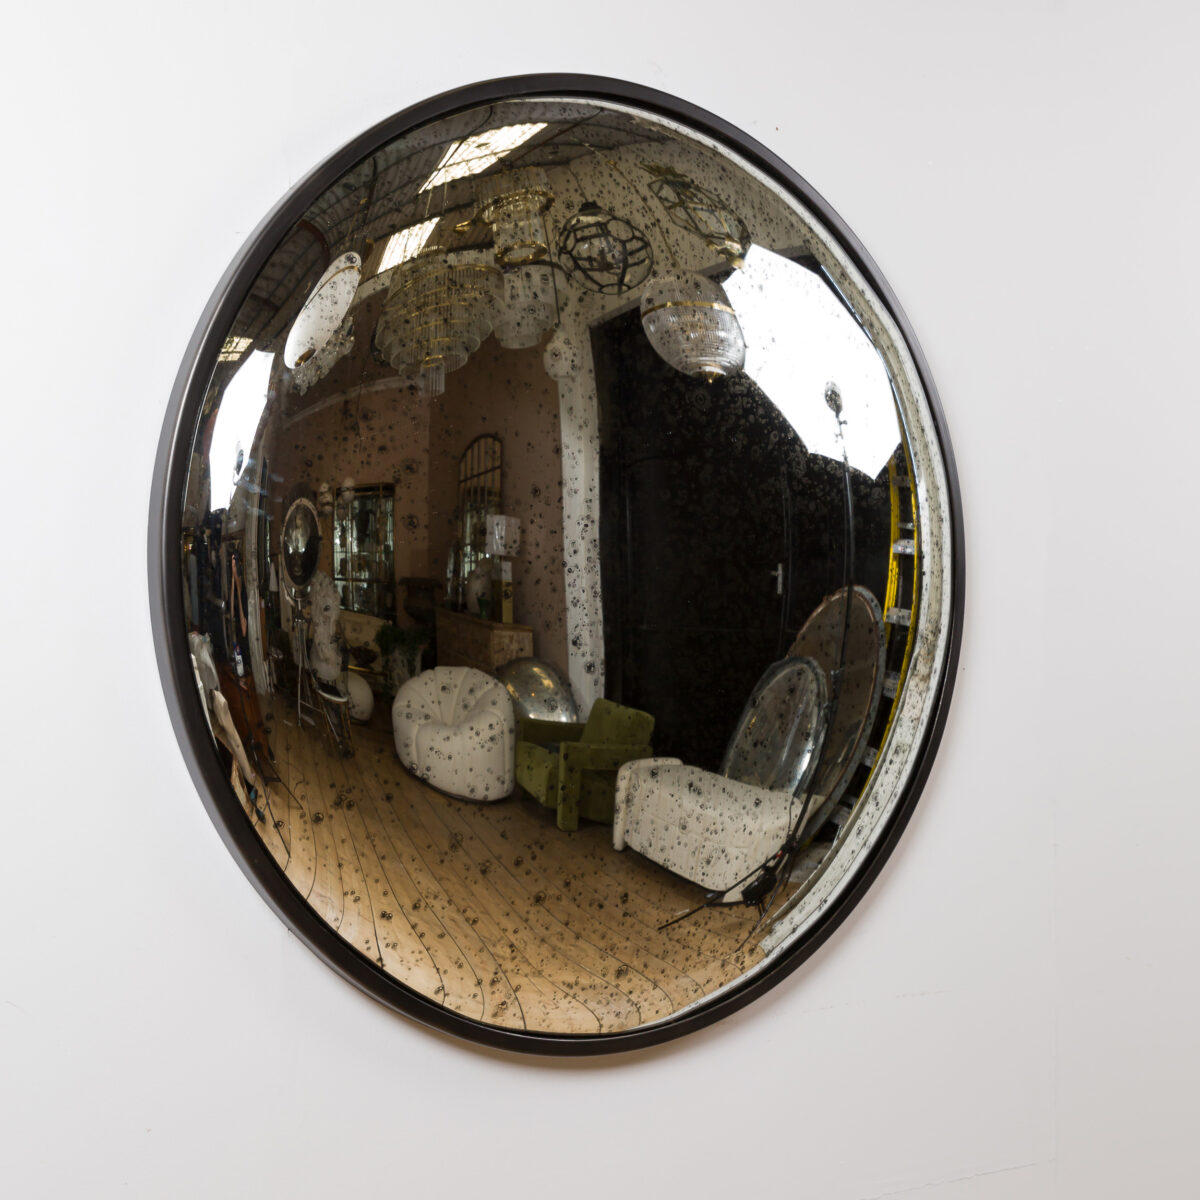 Aged Glass Steel Convex Mirror  - 3 Sizes Available